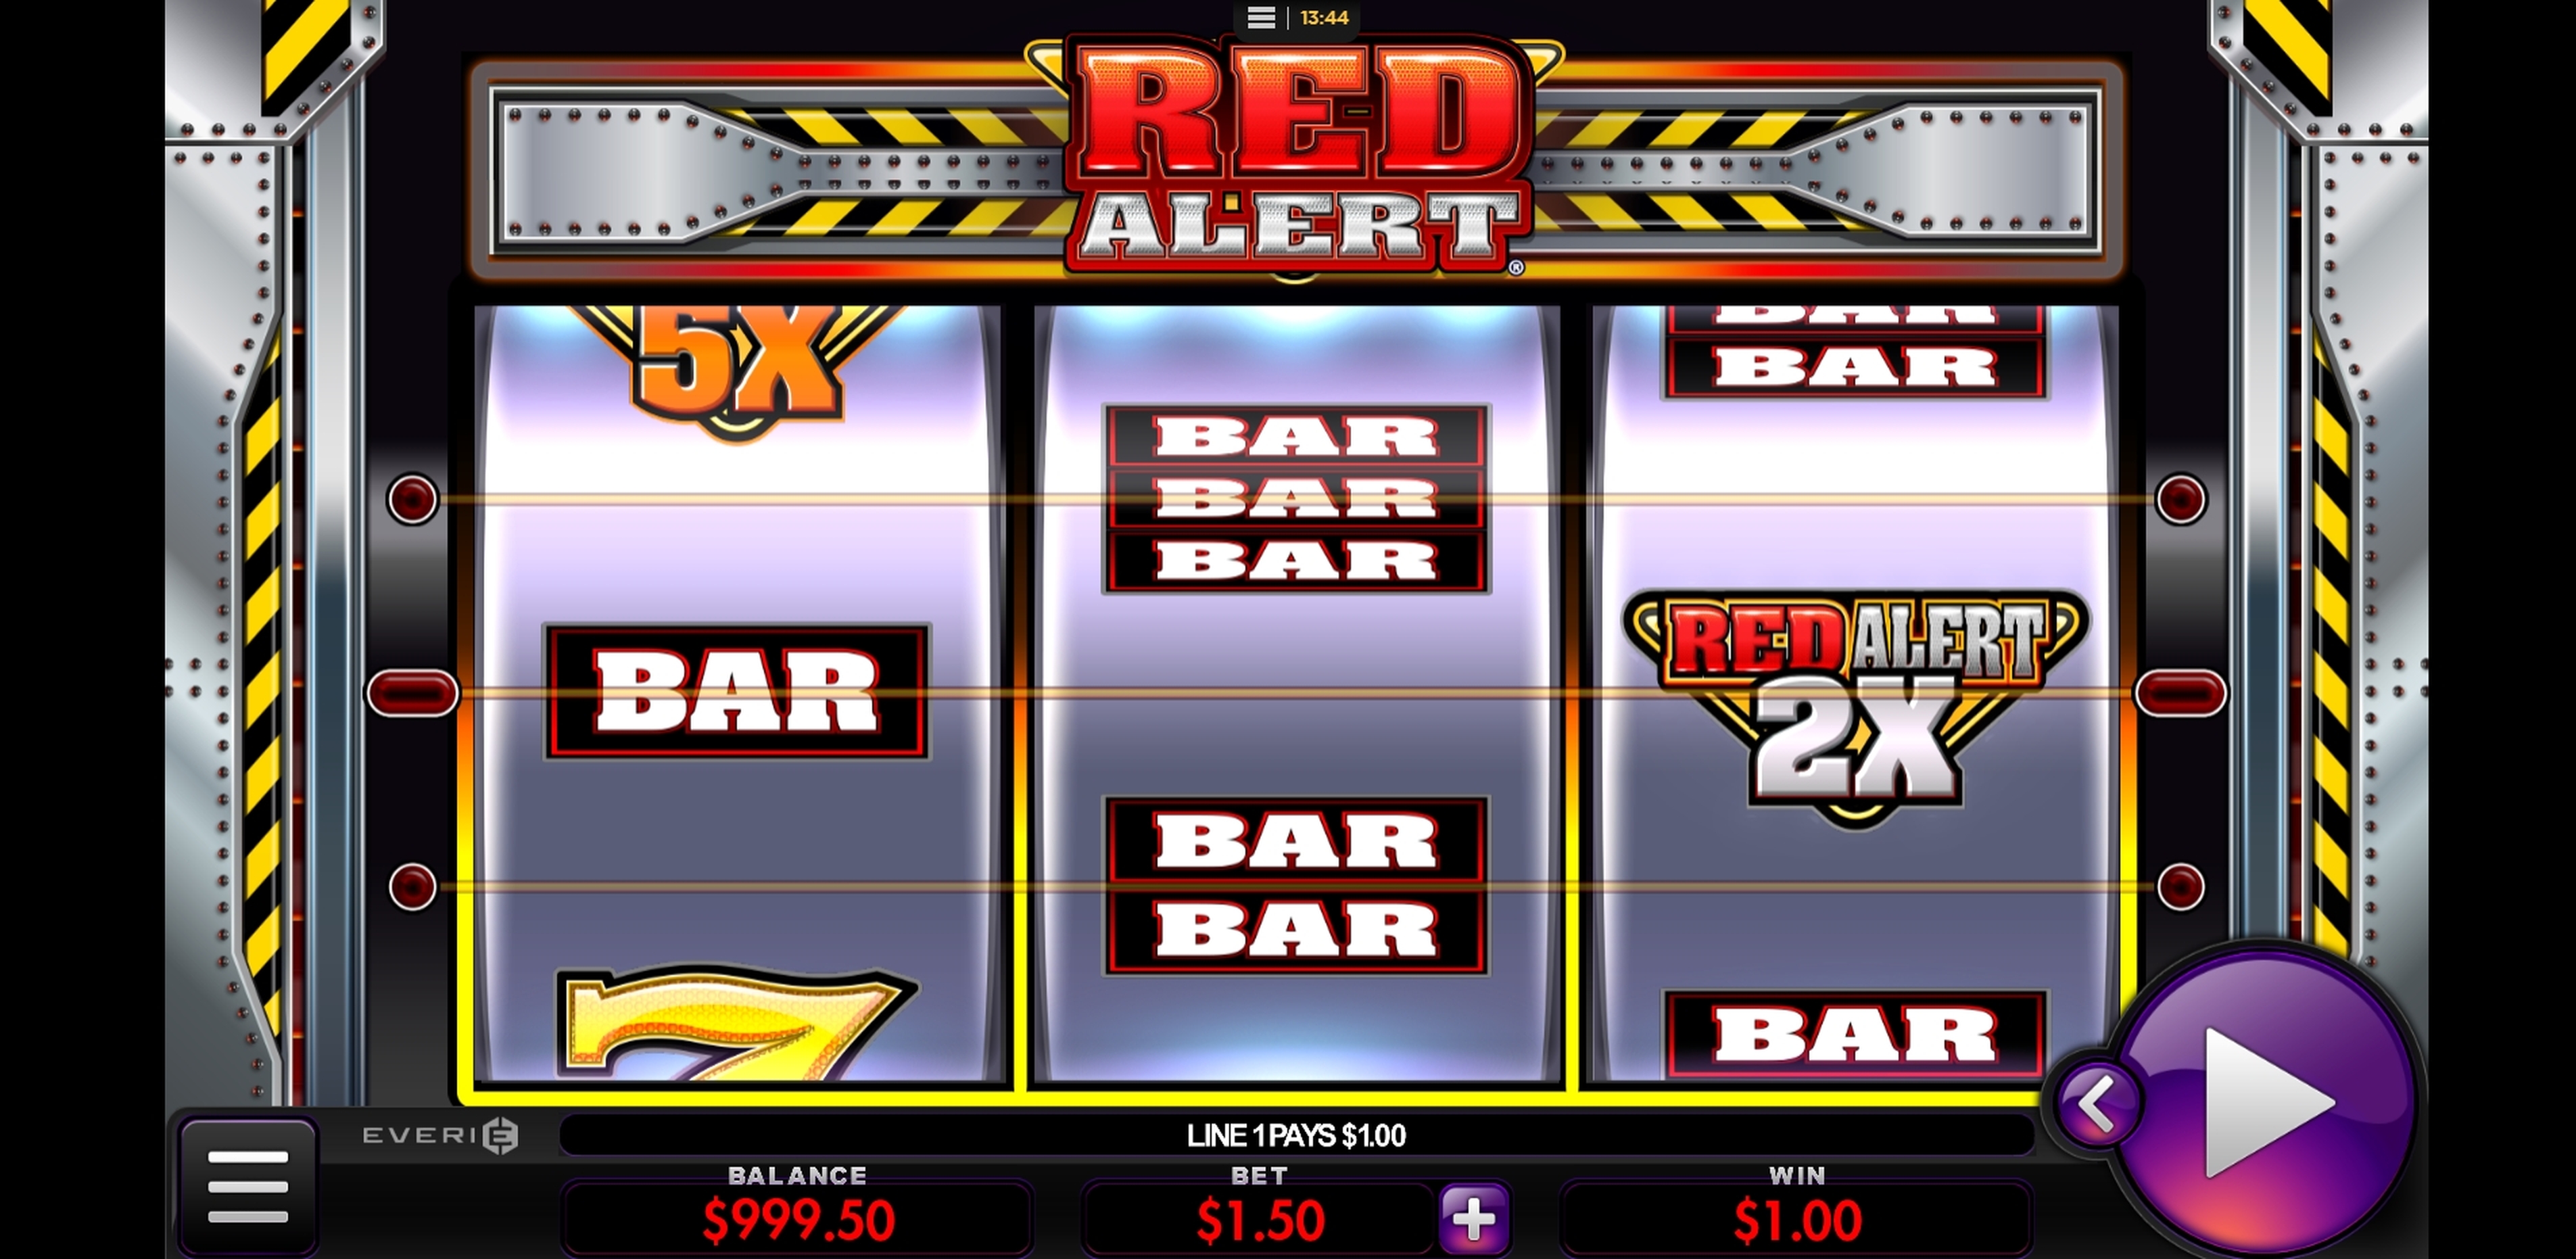 Win Money in Red Alert Free Slot Game by Everi